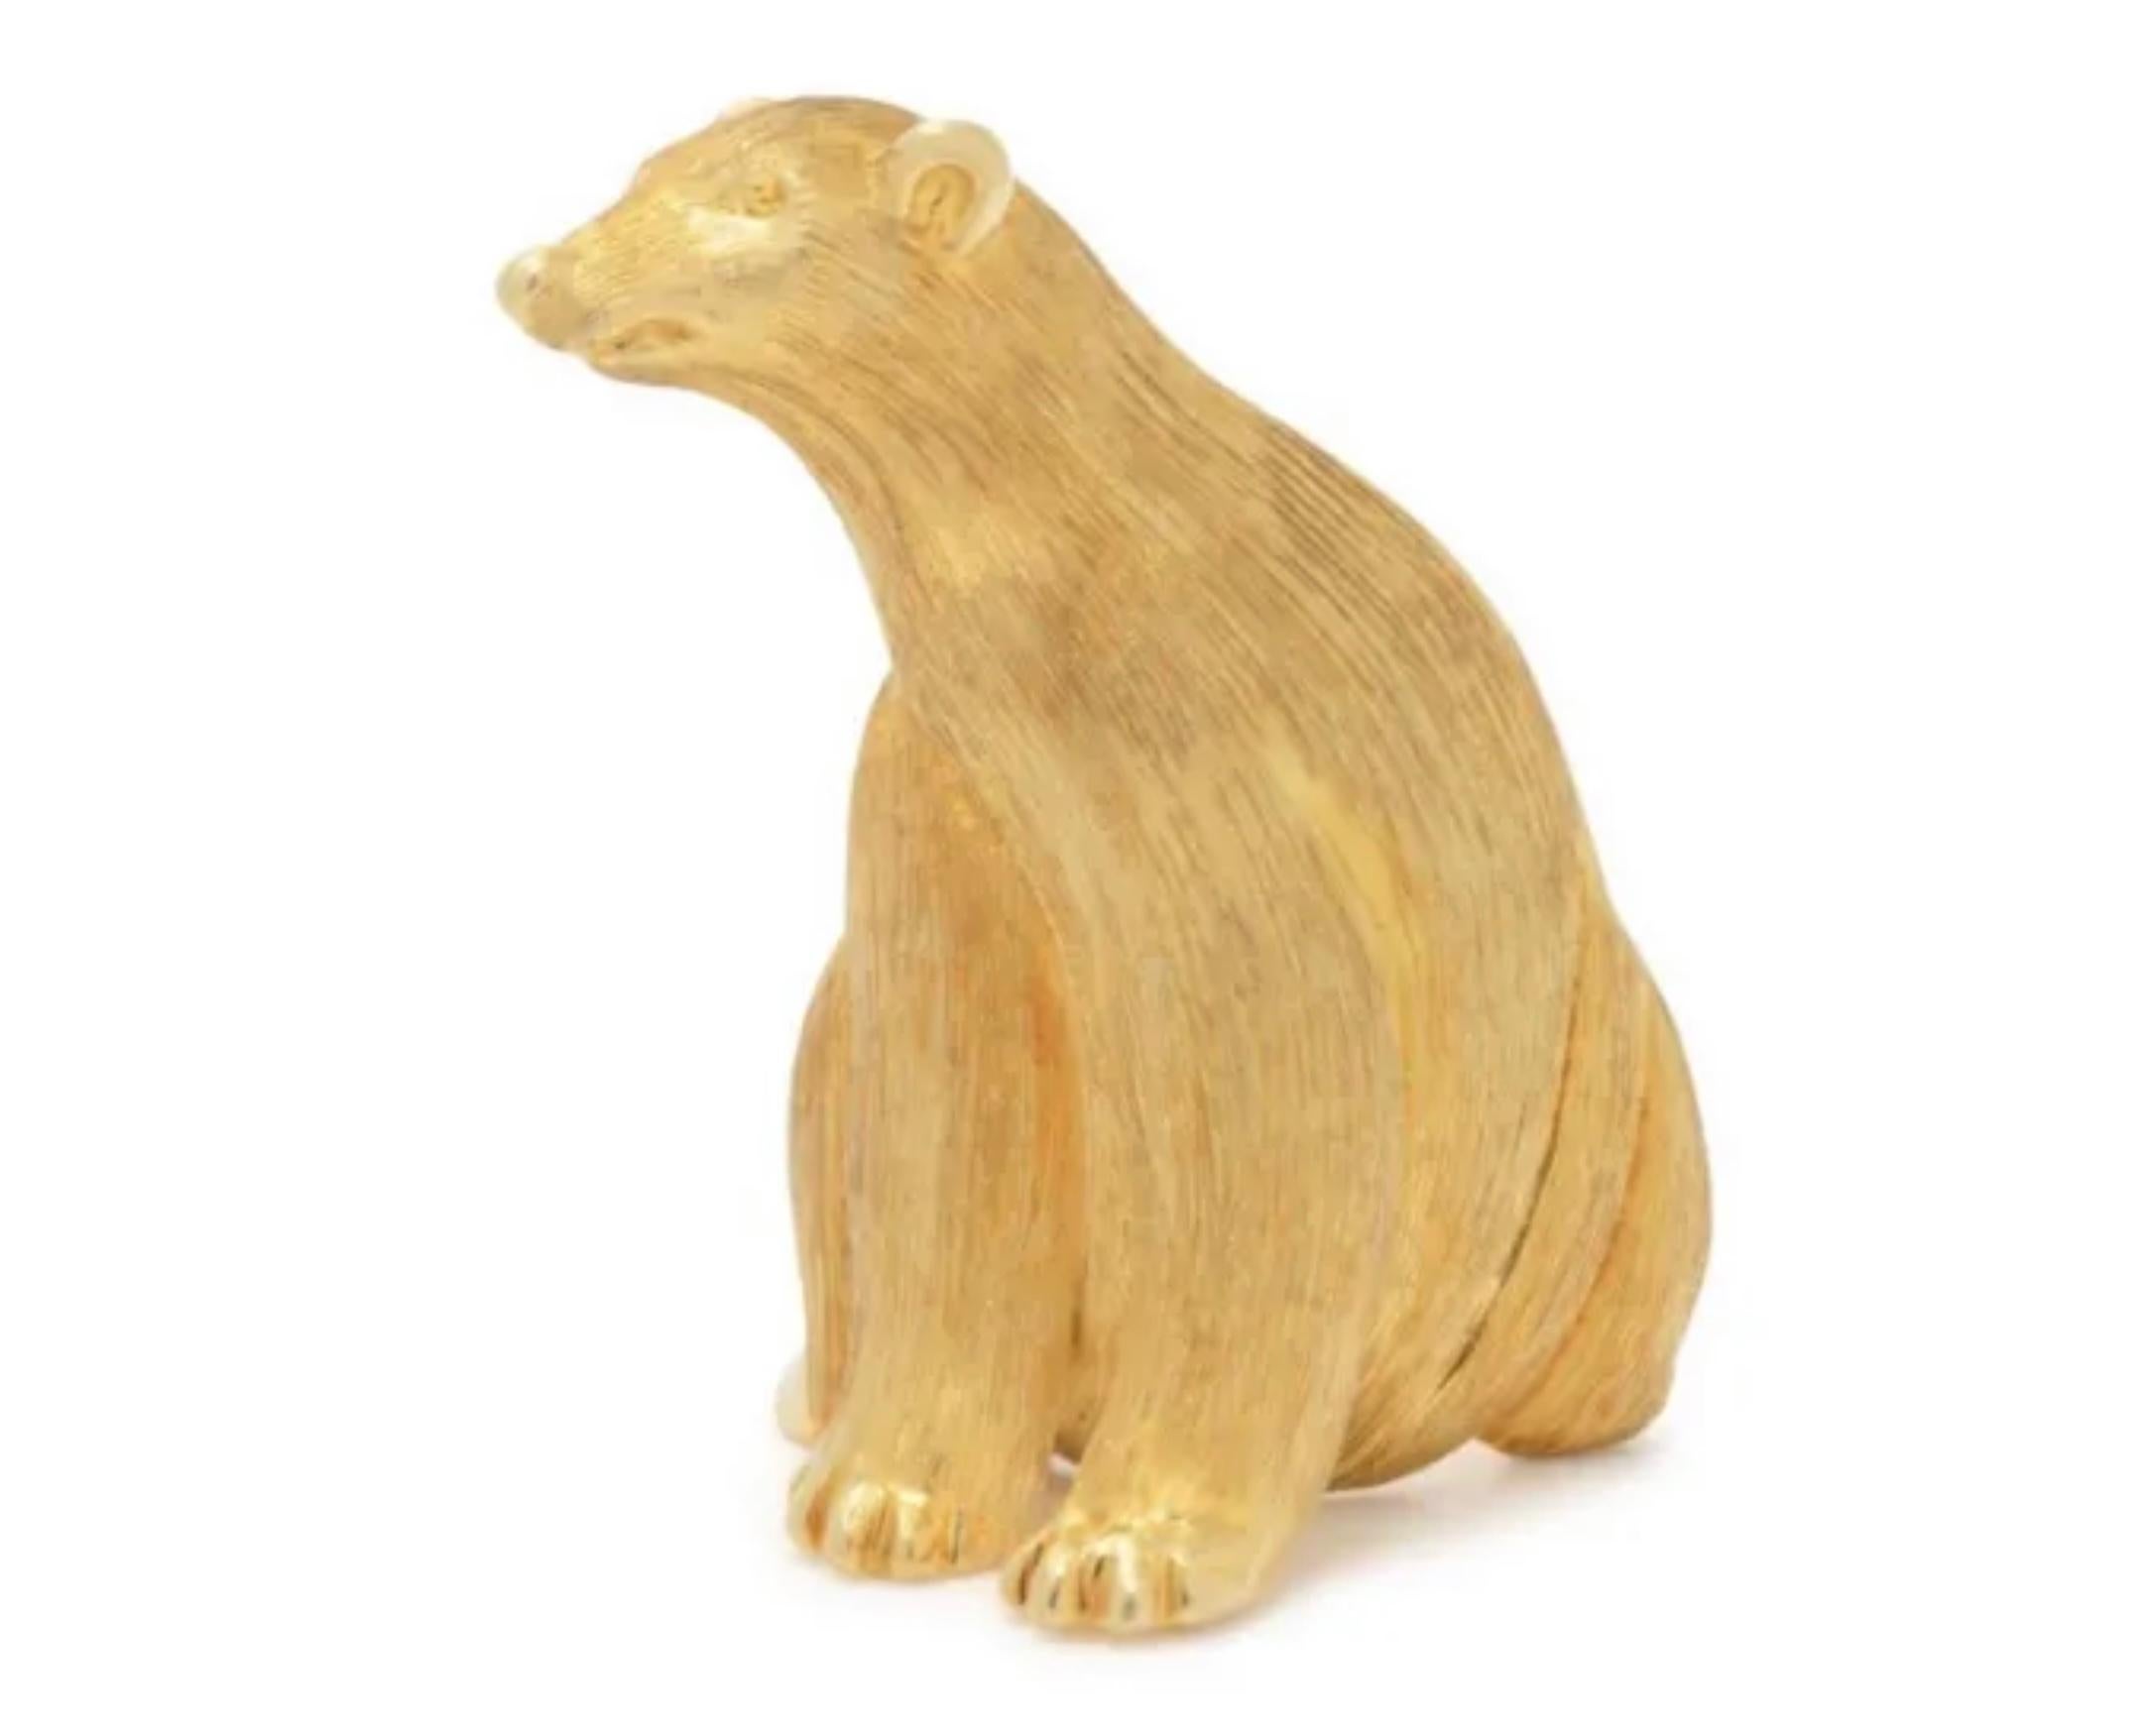 Rare Signed Henry Dunay Animal Bear Brooch 18k Yellow Gold with Sabi Finish.
 
Stunning detailing and craftsmanship, such as the finish of the bears coat which glistens in the light. This is not a lightweight flat brooch but rather a solid finely